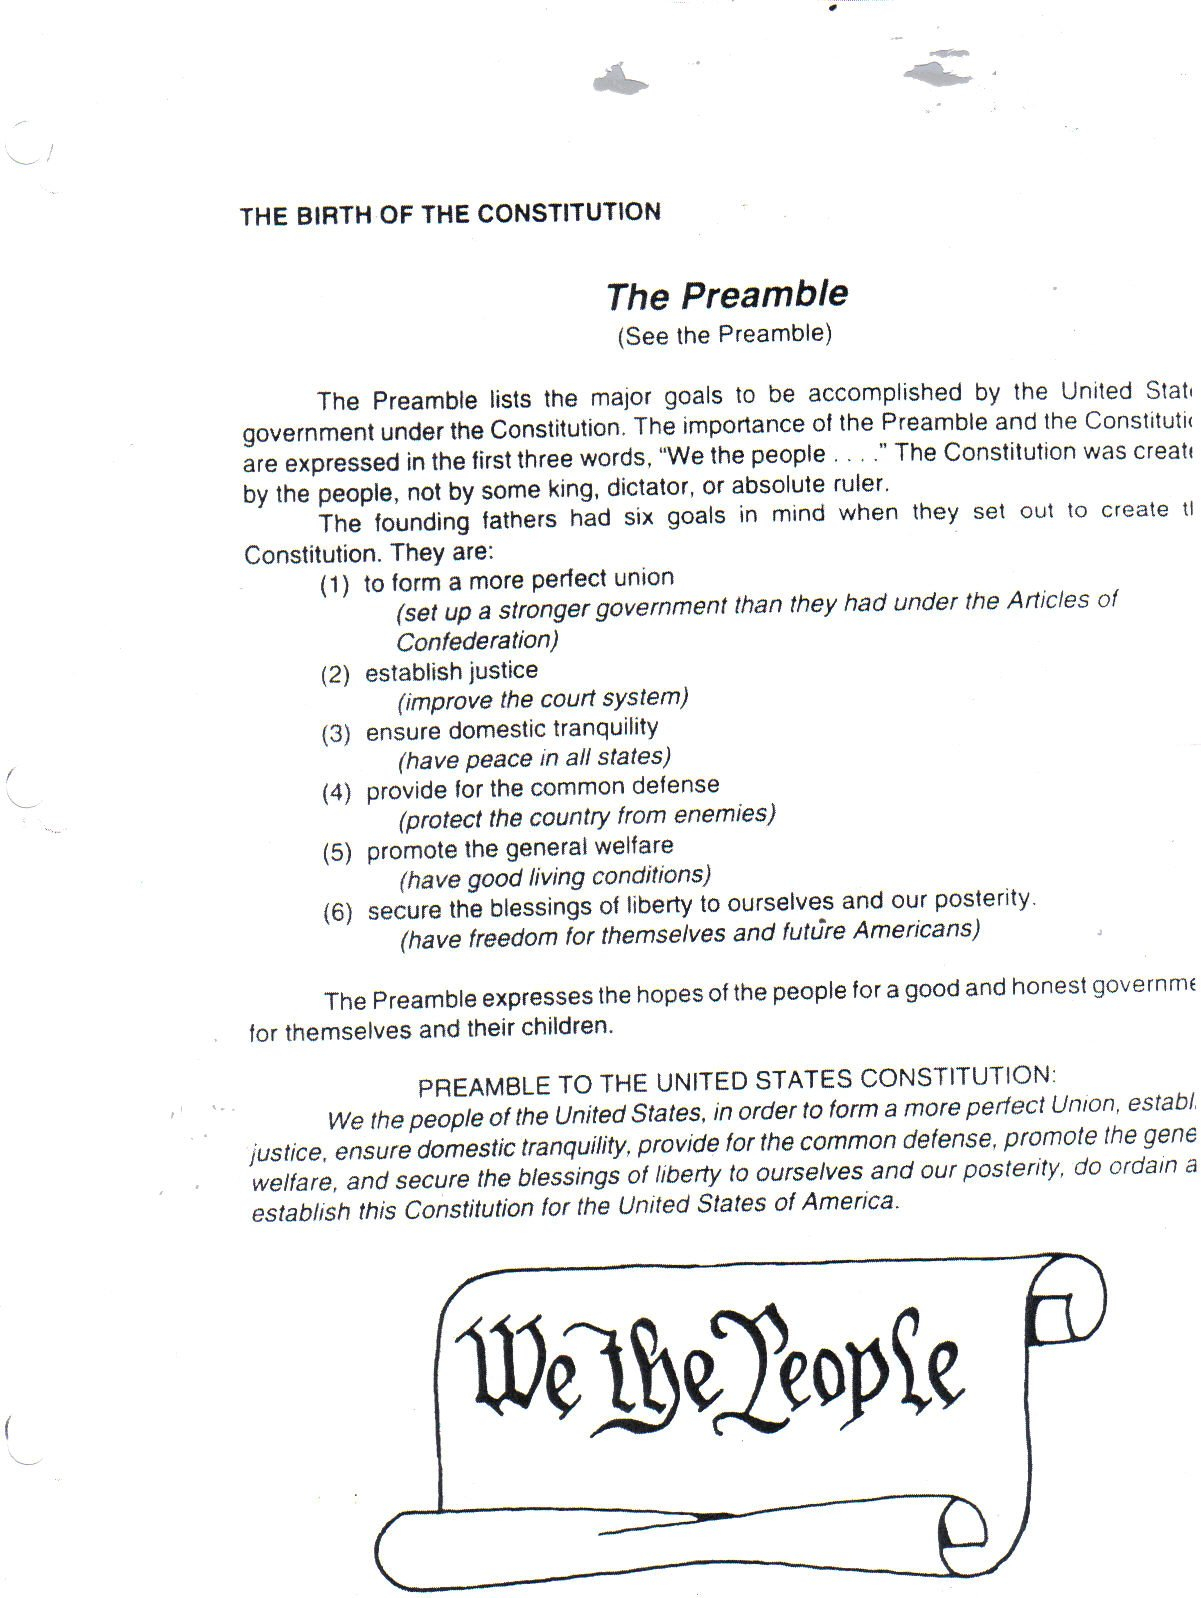 Separation Of Powers Worksheet The Best Worksheets Image Collection For The Birth Of The Constitution Worksheet Answer Key